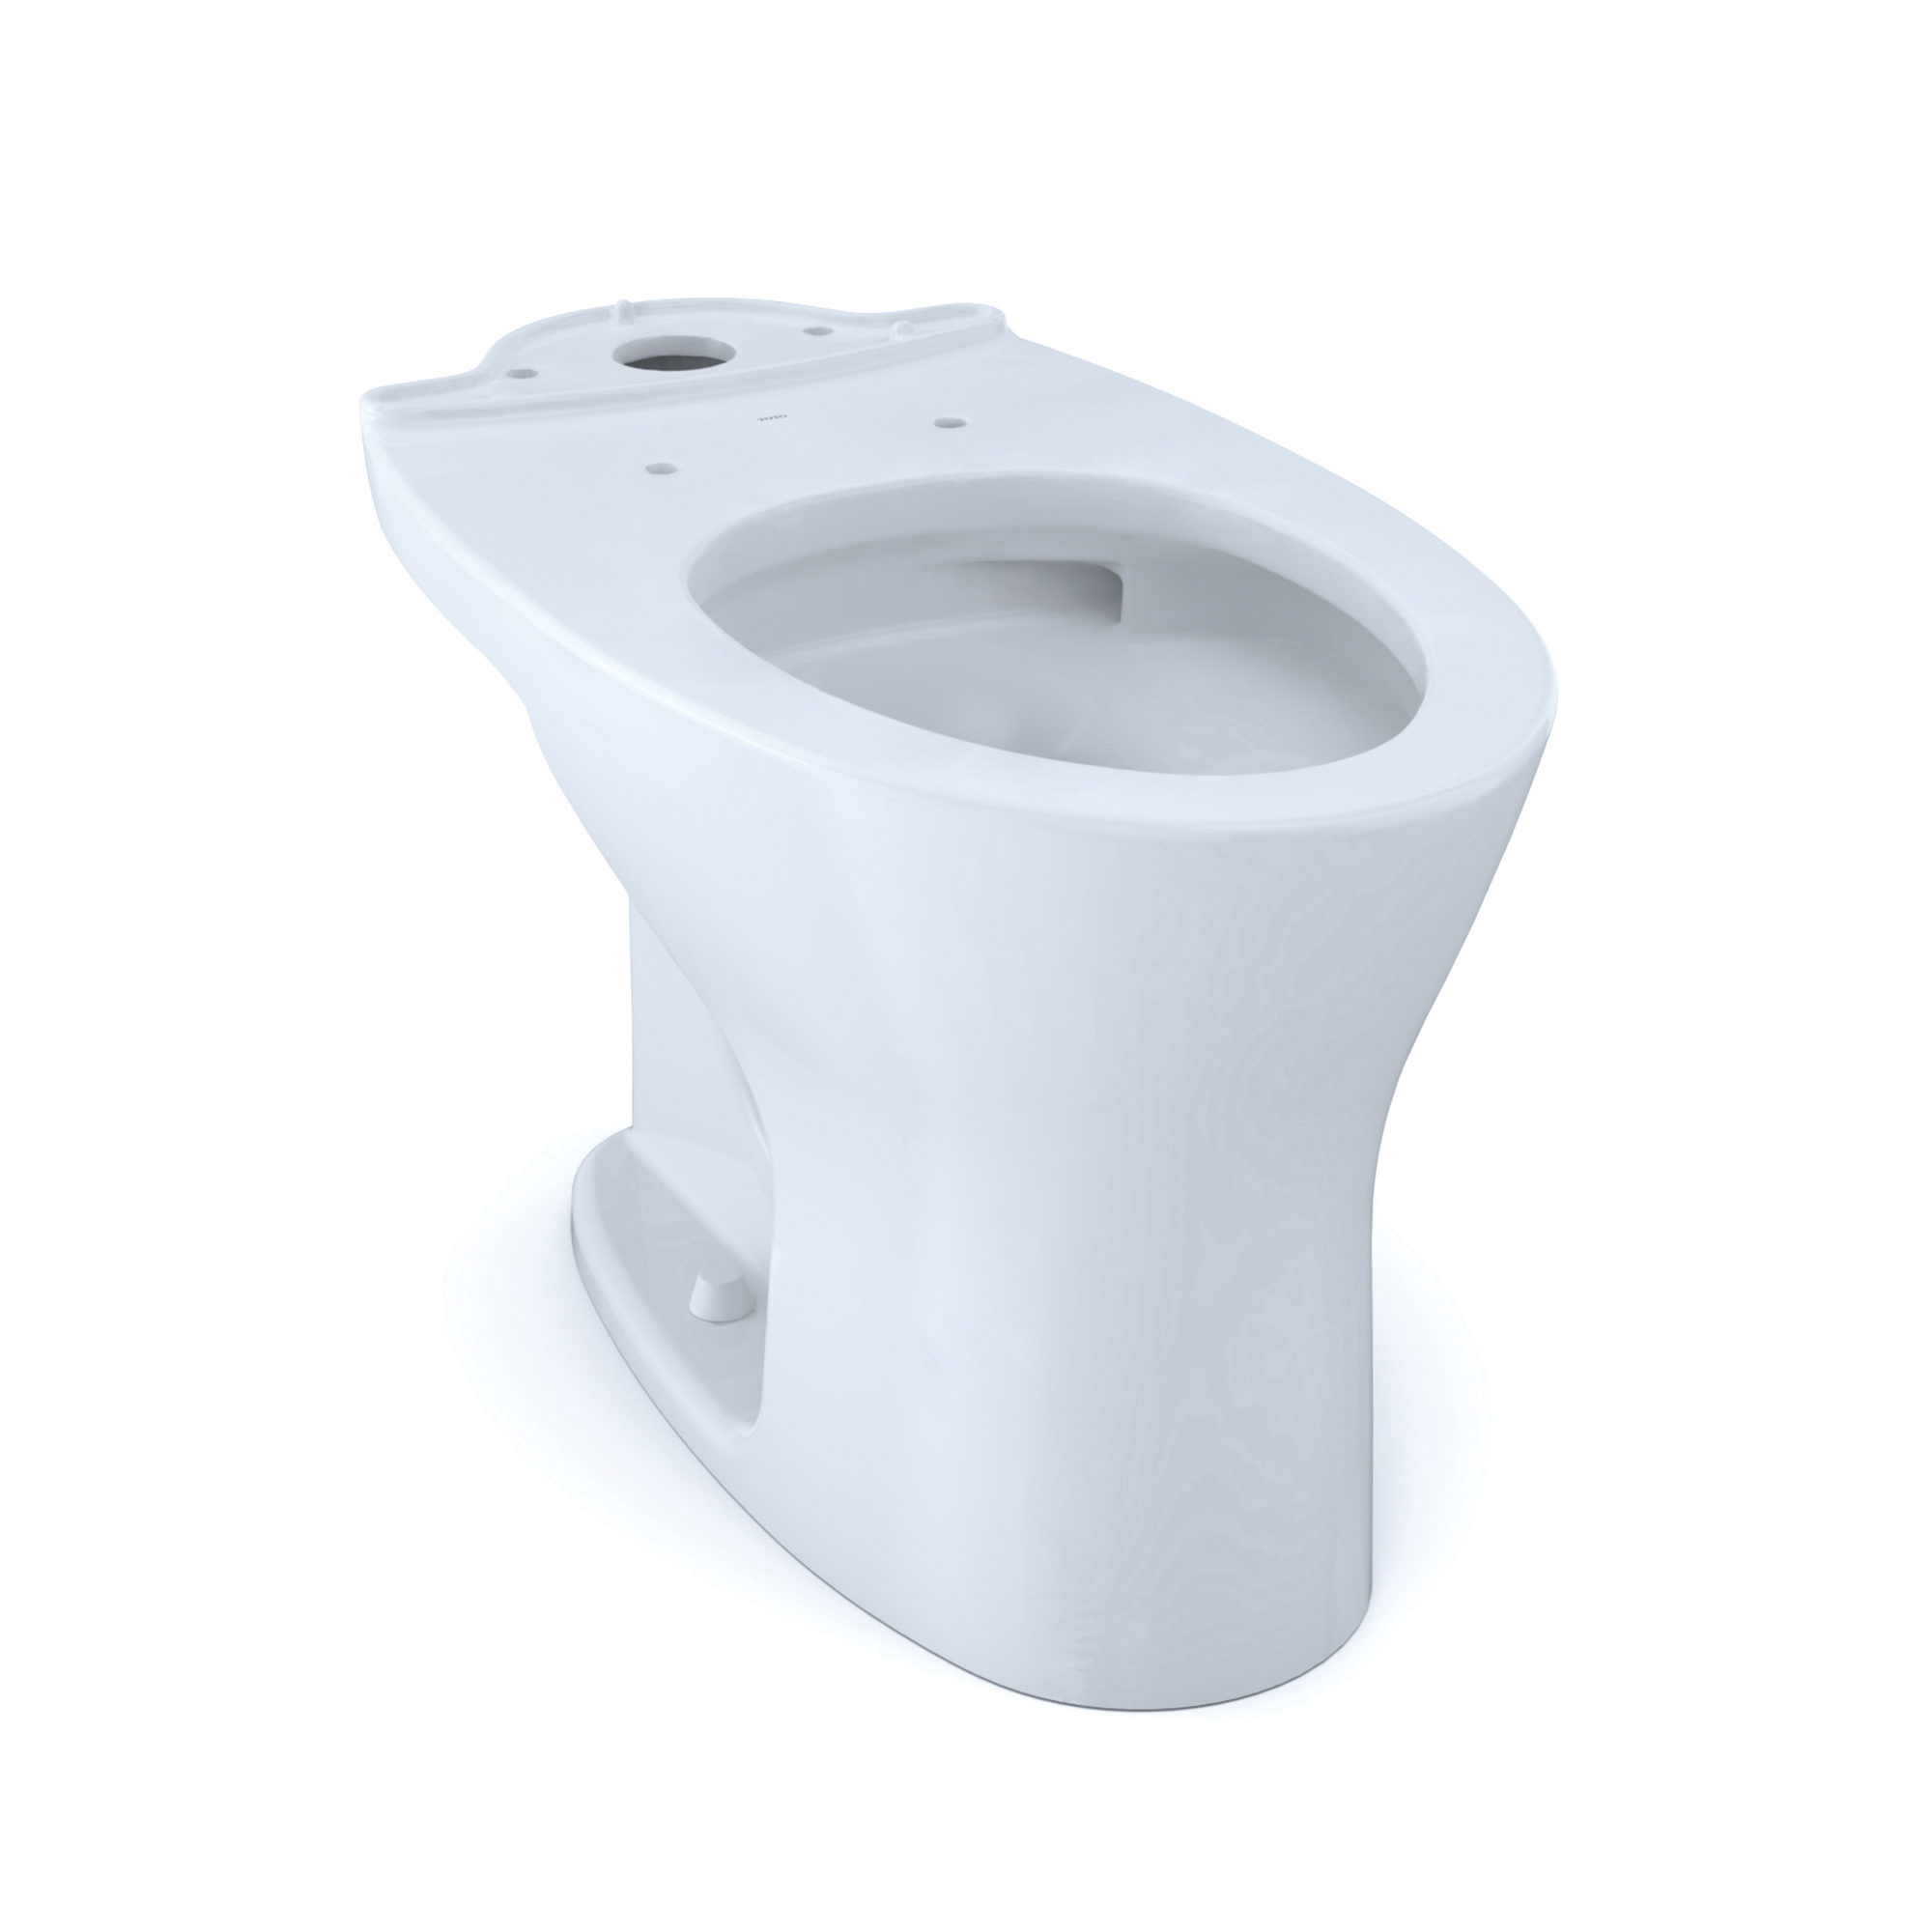 Toto® CT746CUFG#01 Drake® Universal Height Toilet Bowl With CEFIONTECT® Ceramic Glaze, Cotton White, Elongated Front Shape, 12 in Rough-In, 16-1/8 in H Rim, 2-1/2 in Dia Trapway